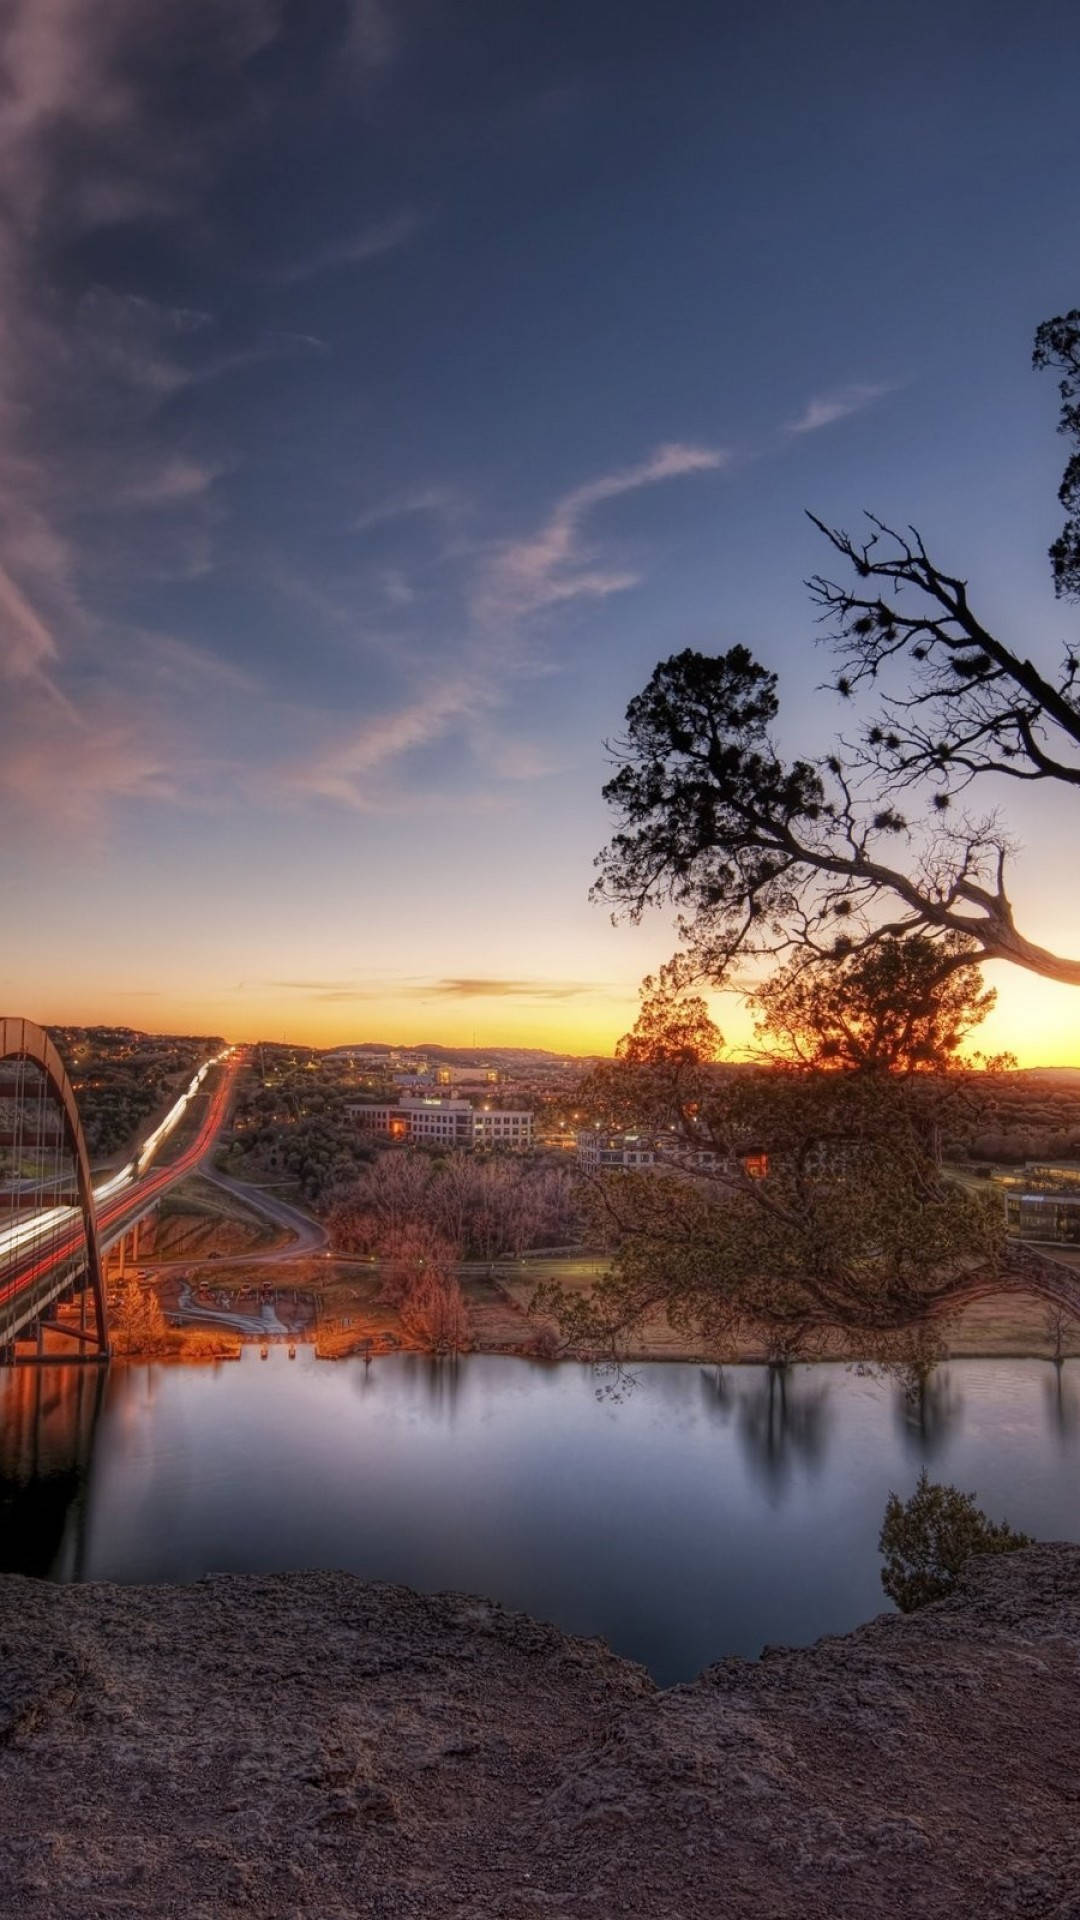 The 360 Bridge in Austin, Texas, with a sunset in the background. - Texas